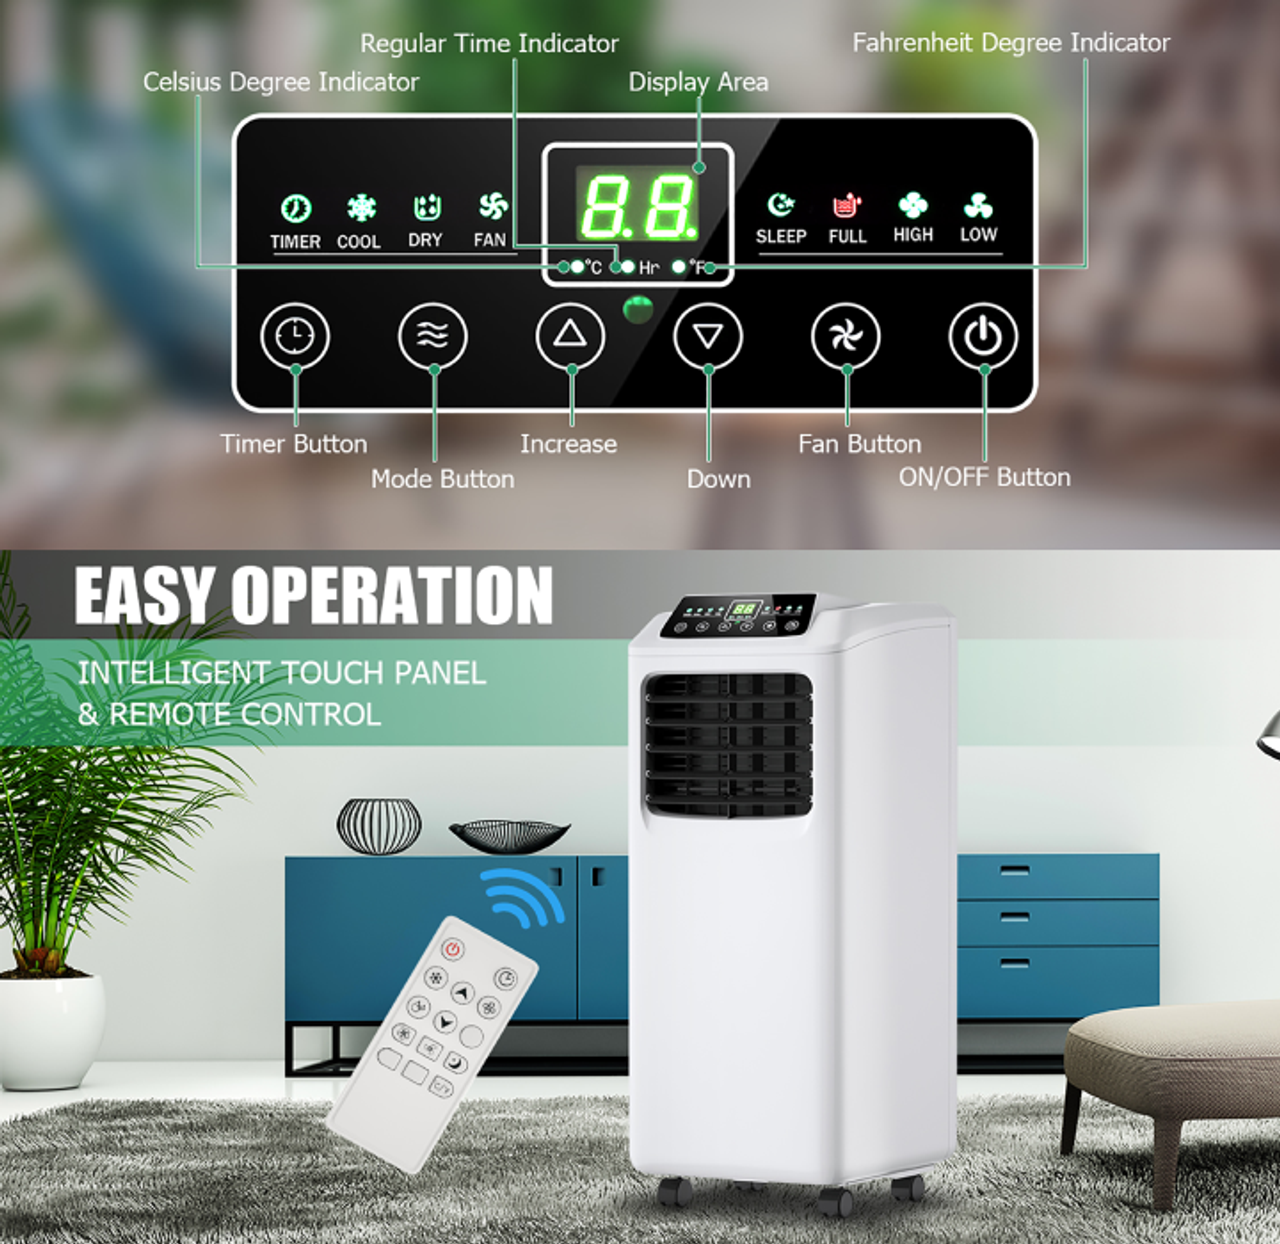 Portable 8,000BTU Air Conditioner & Dehumidifier with Remote product image